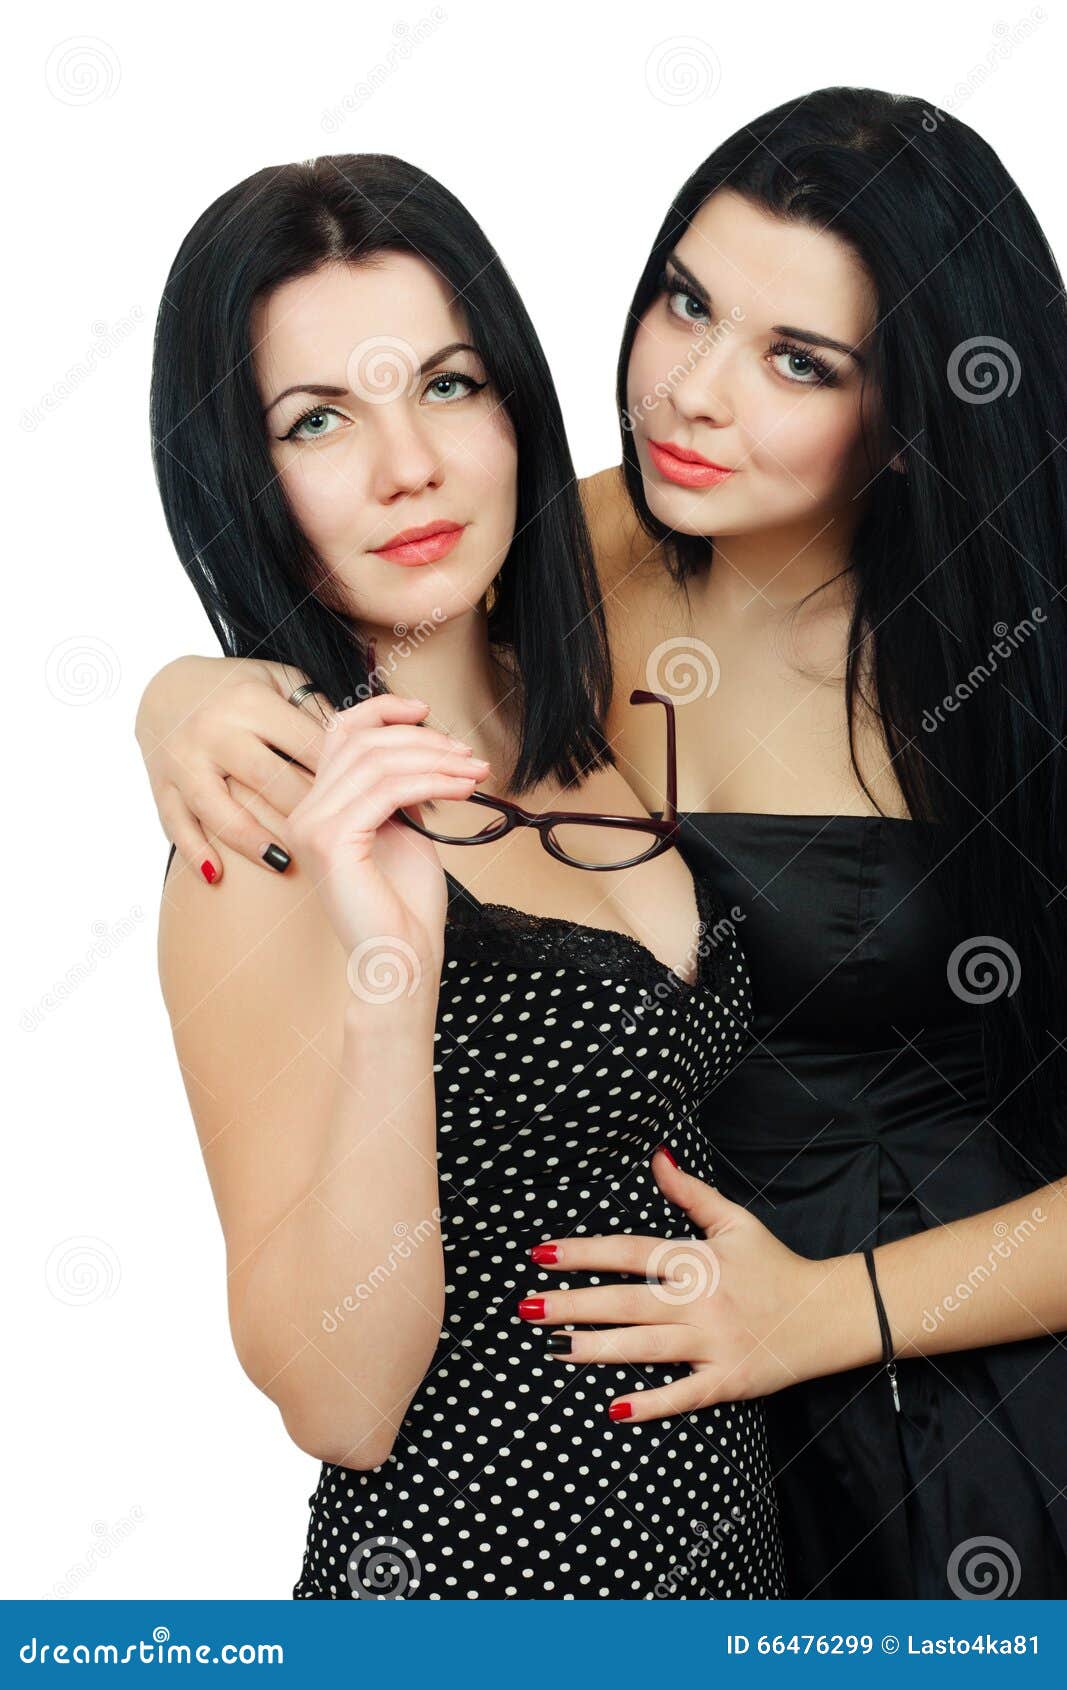 Two hot brunette stock image pic picture